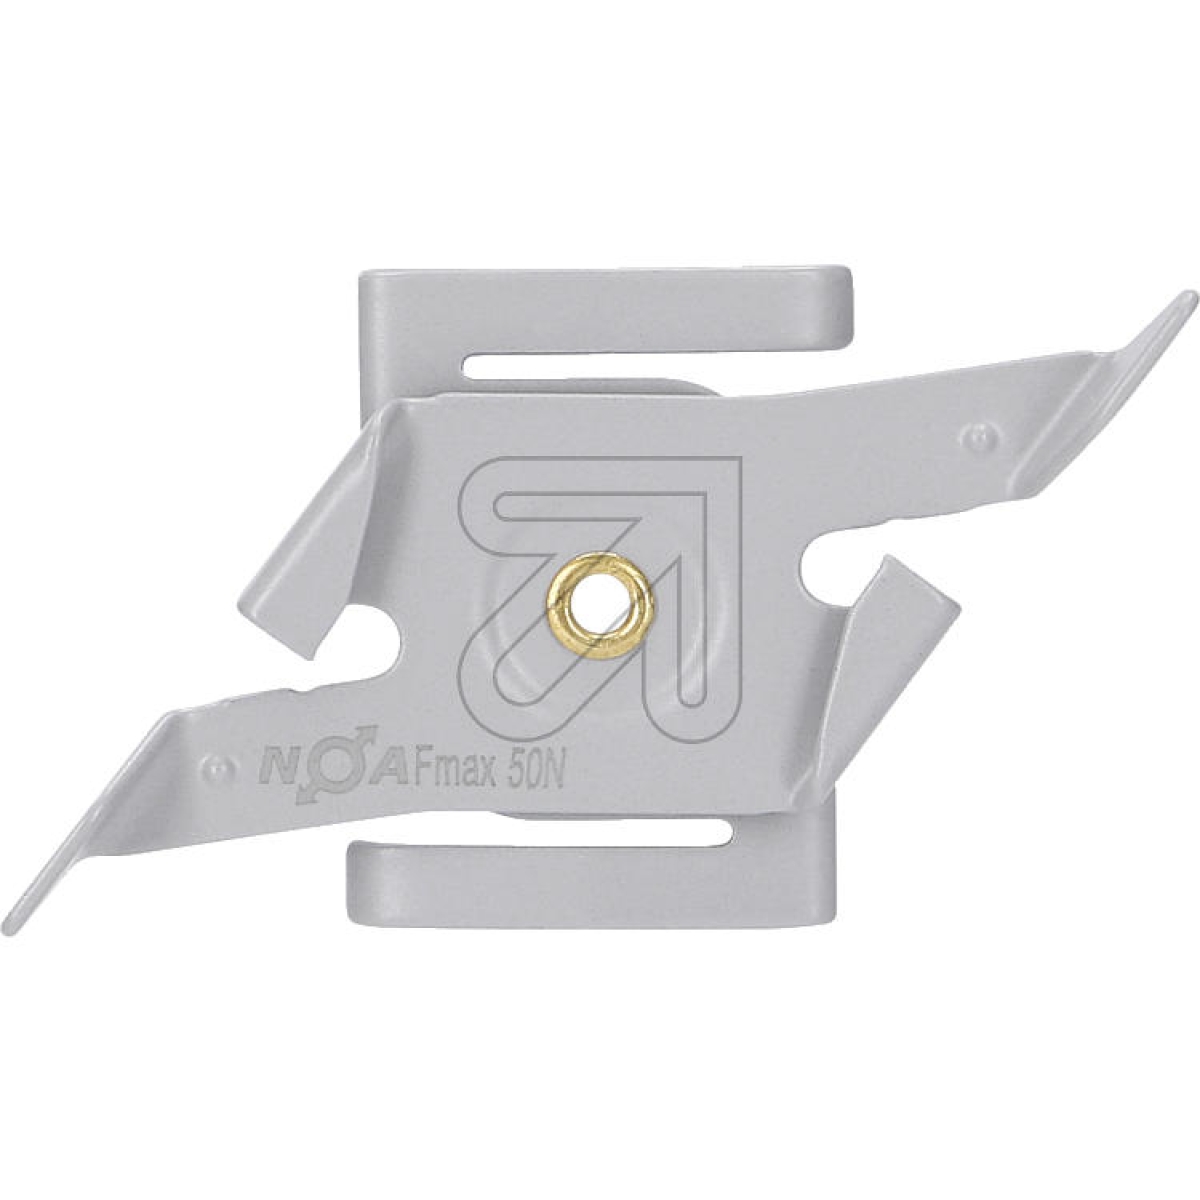 Global TracT-profile ceiling clip for 3-phase track, gray SKB 11T-1-Price for 2 pcs.Article-No: 669600